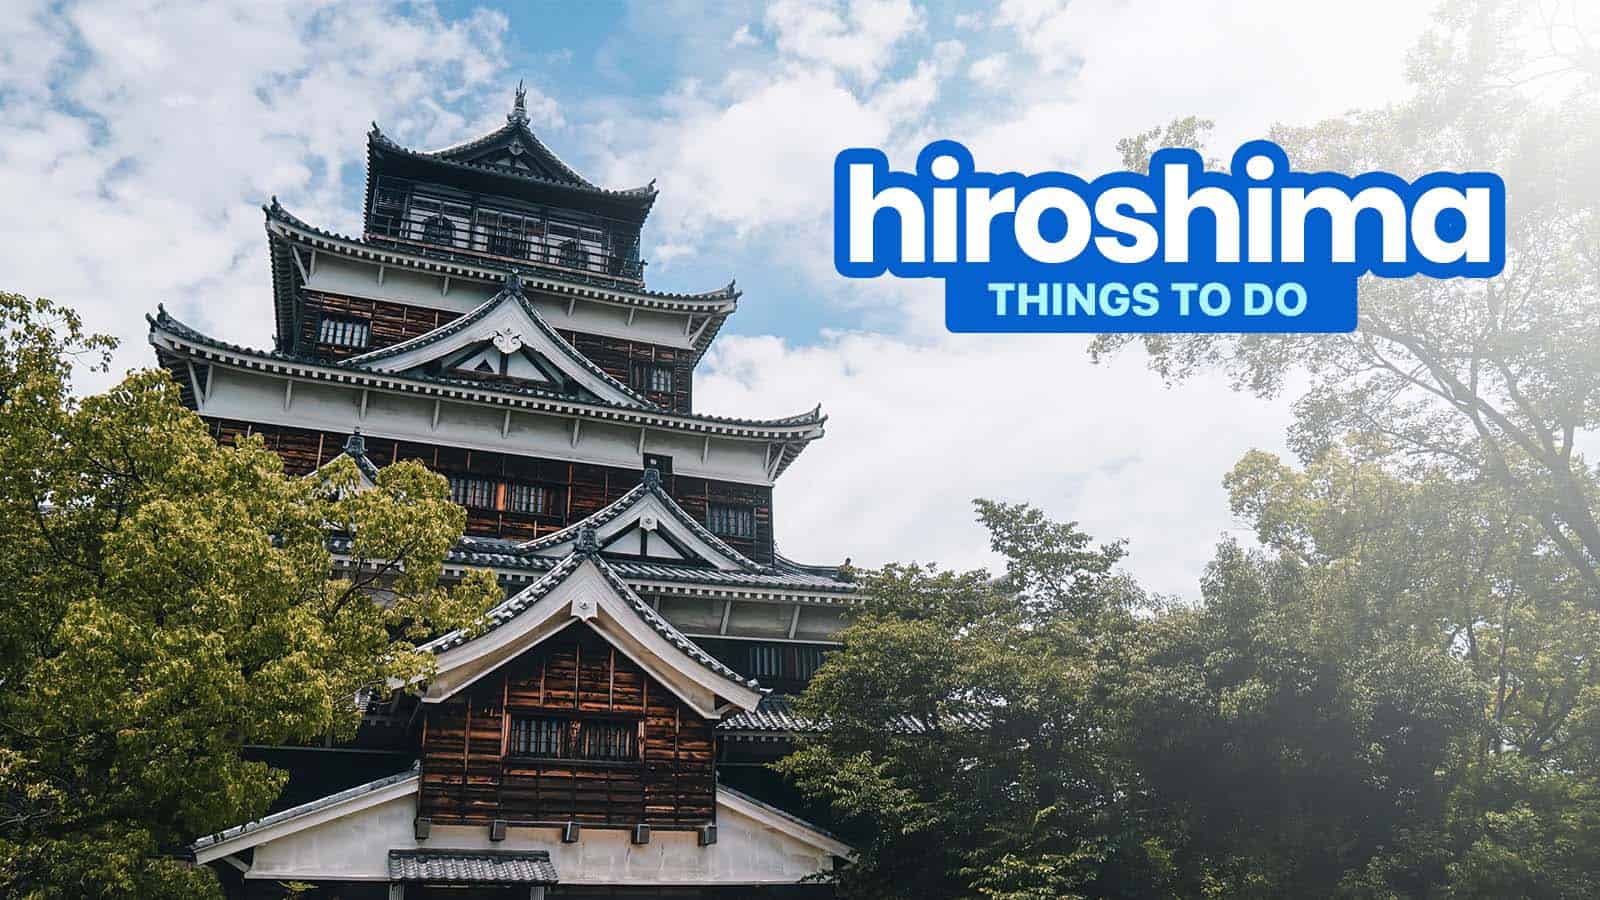 HIROSHIMA ITINERARY: 9 Best Things to Do & Places to Visit